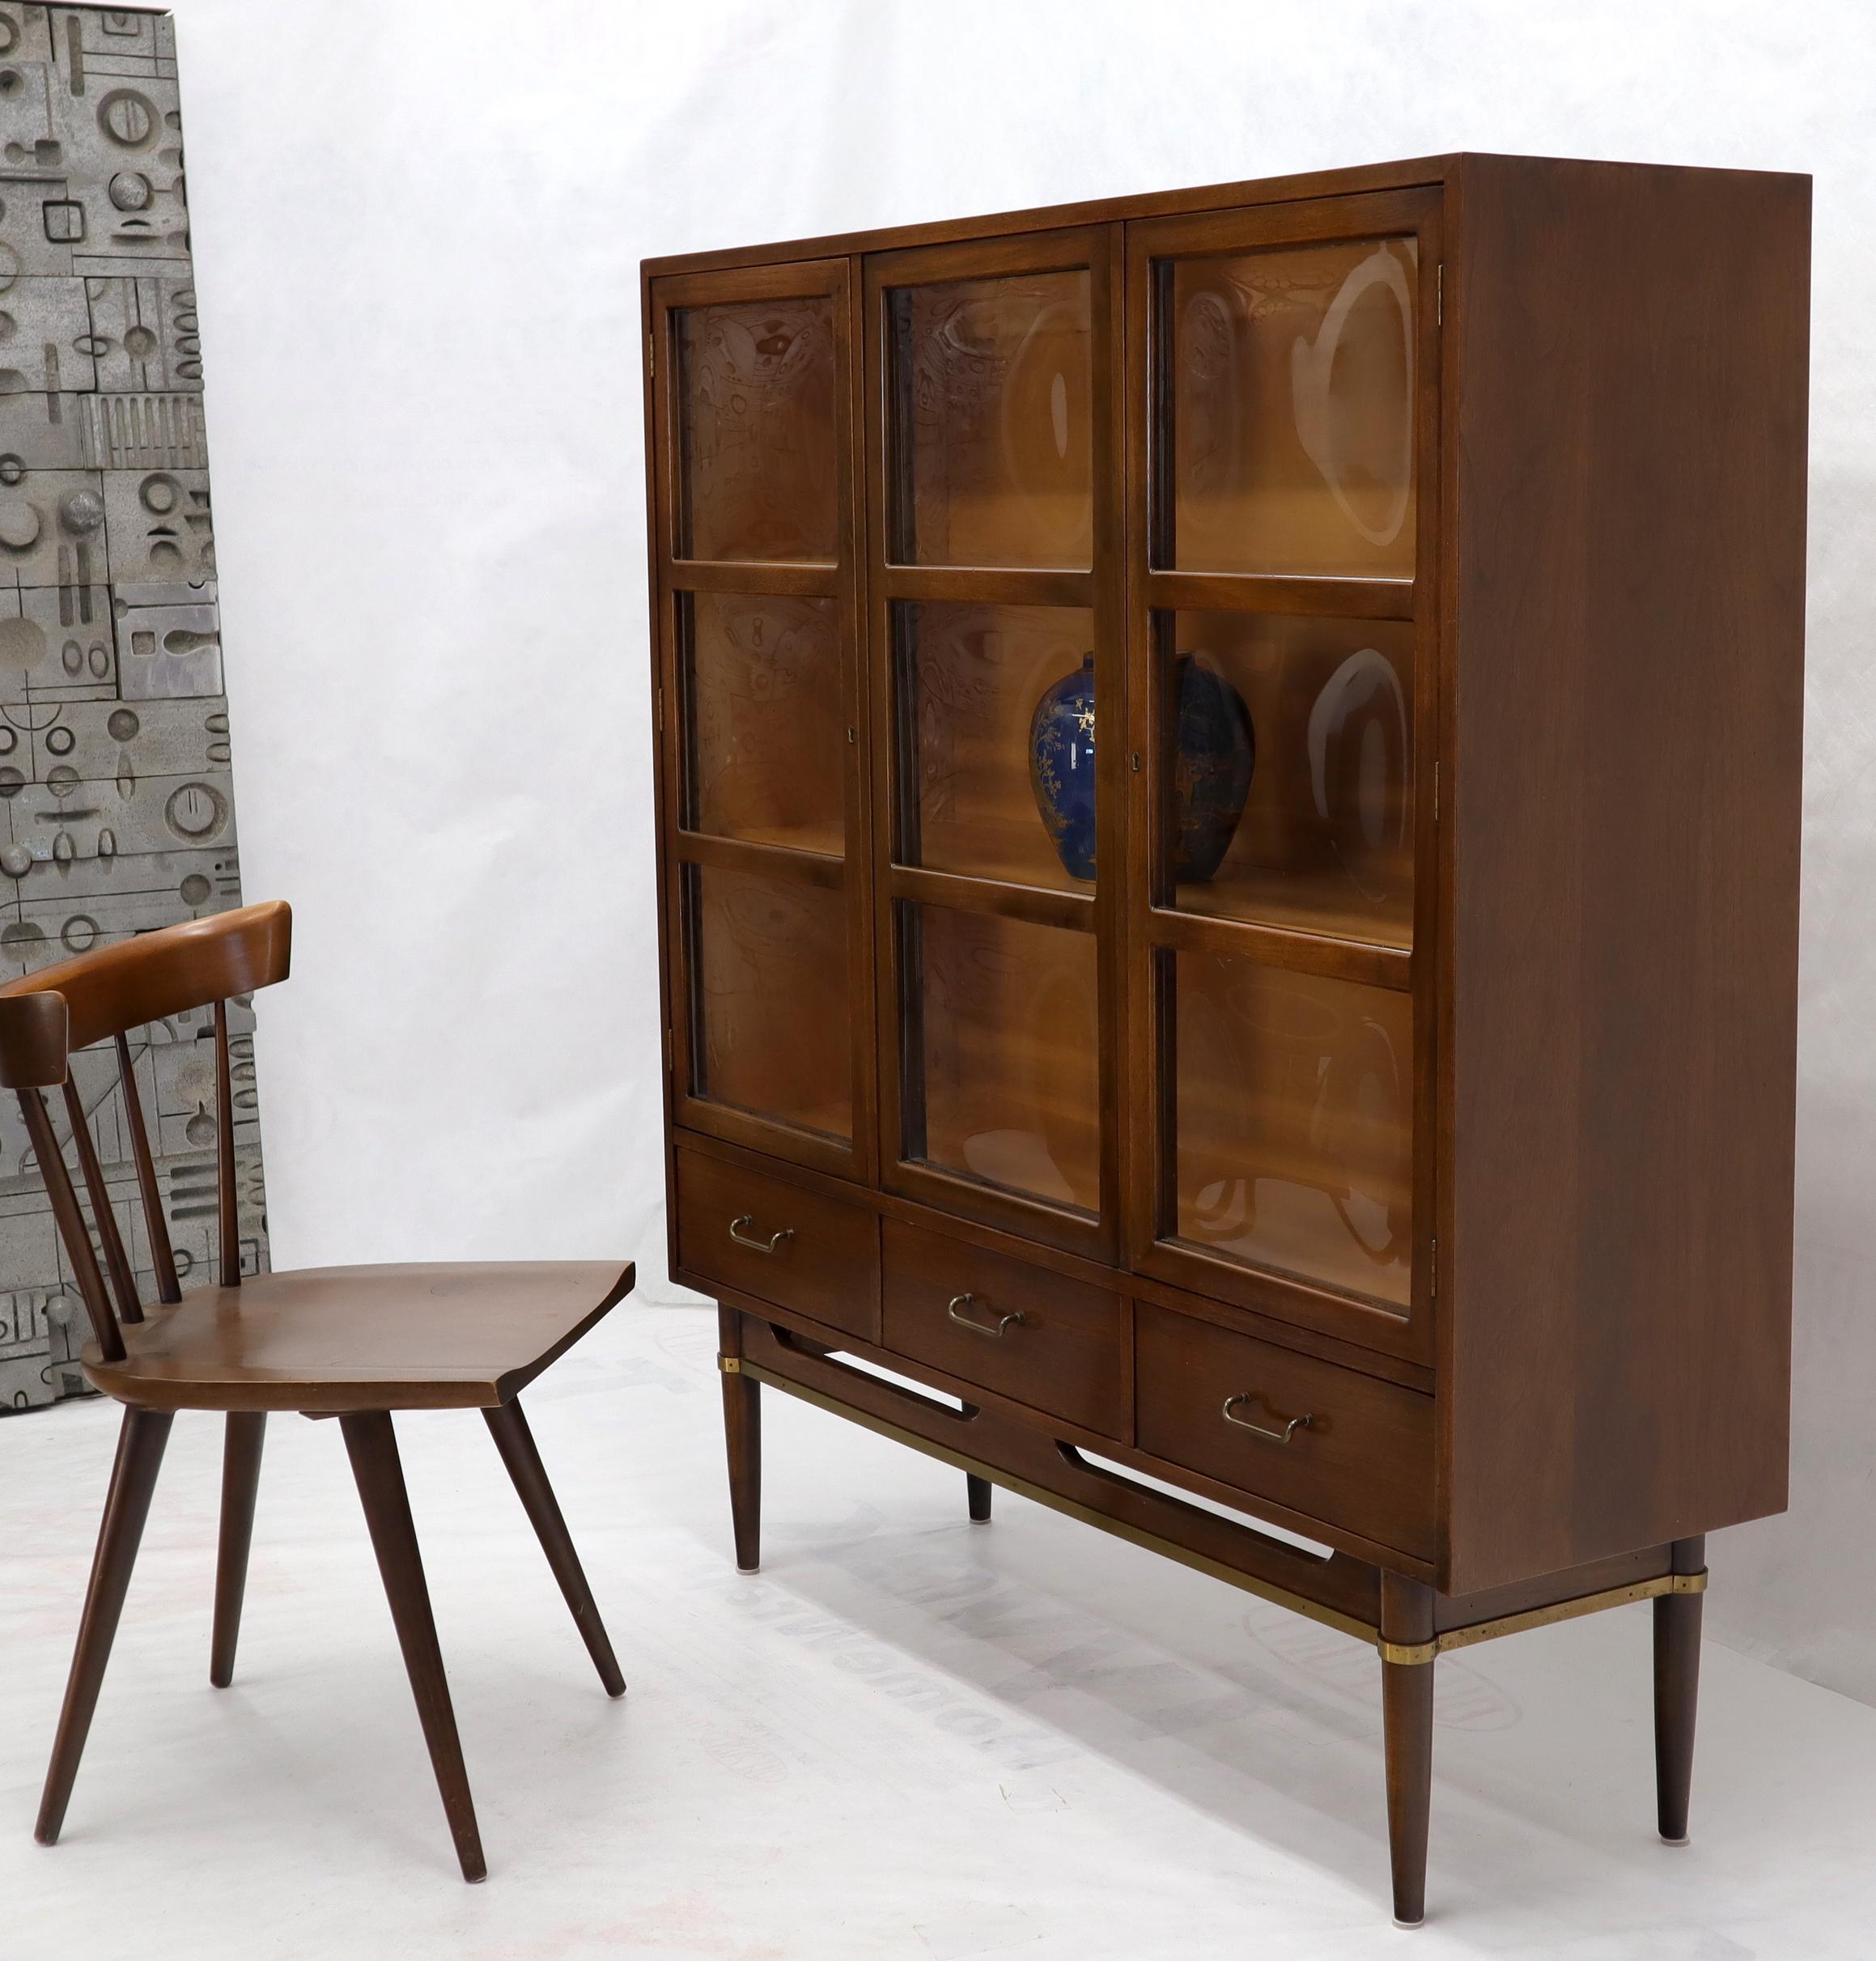 Mid-Century Modern walnut bubble glass display cabinet. Stunning condition vitrine with three drawers on the bottom standing on tapered legs with brass accents.